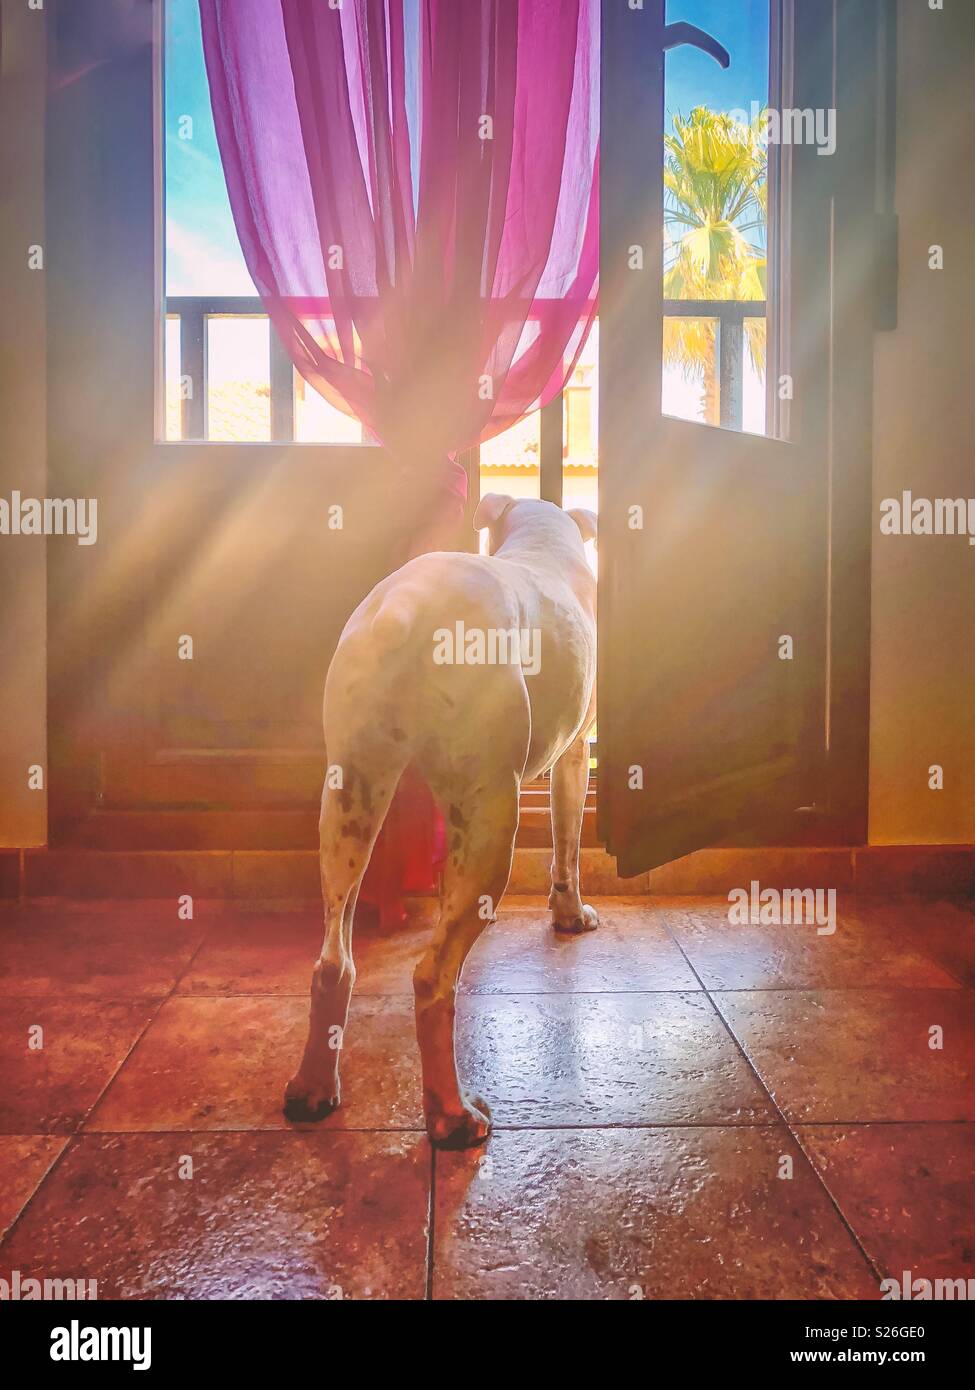 White boxer dog stands looking out of a balcony door. The floor is tiled there is a net pink curtain and the sun is forming rays of light glare. The dog is seen from behind. Stock Photo